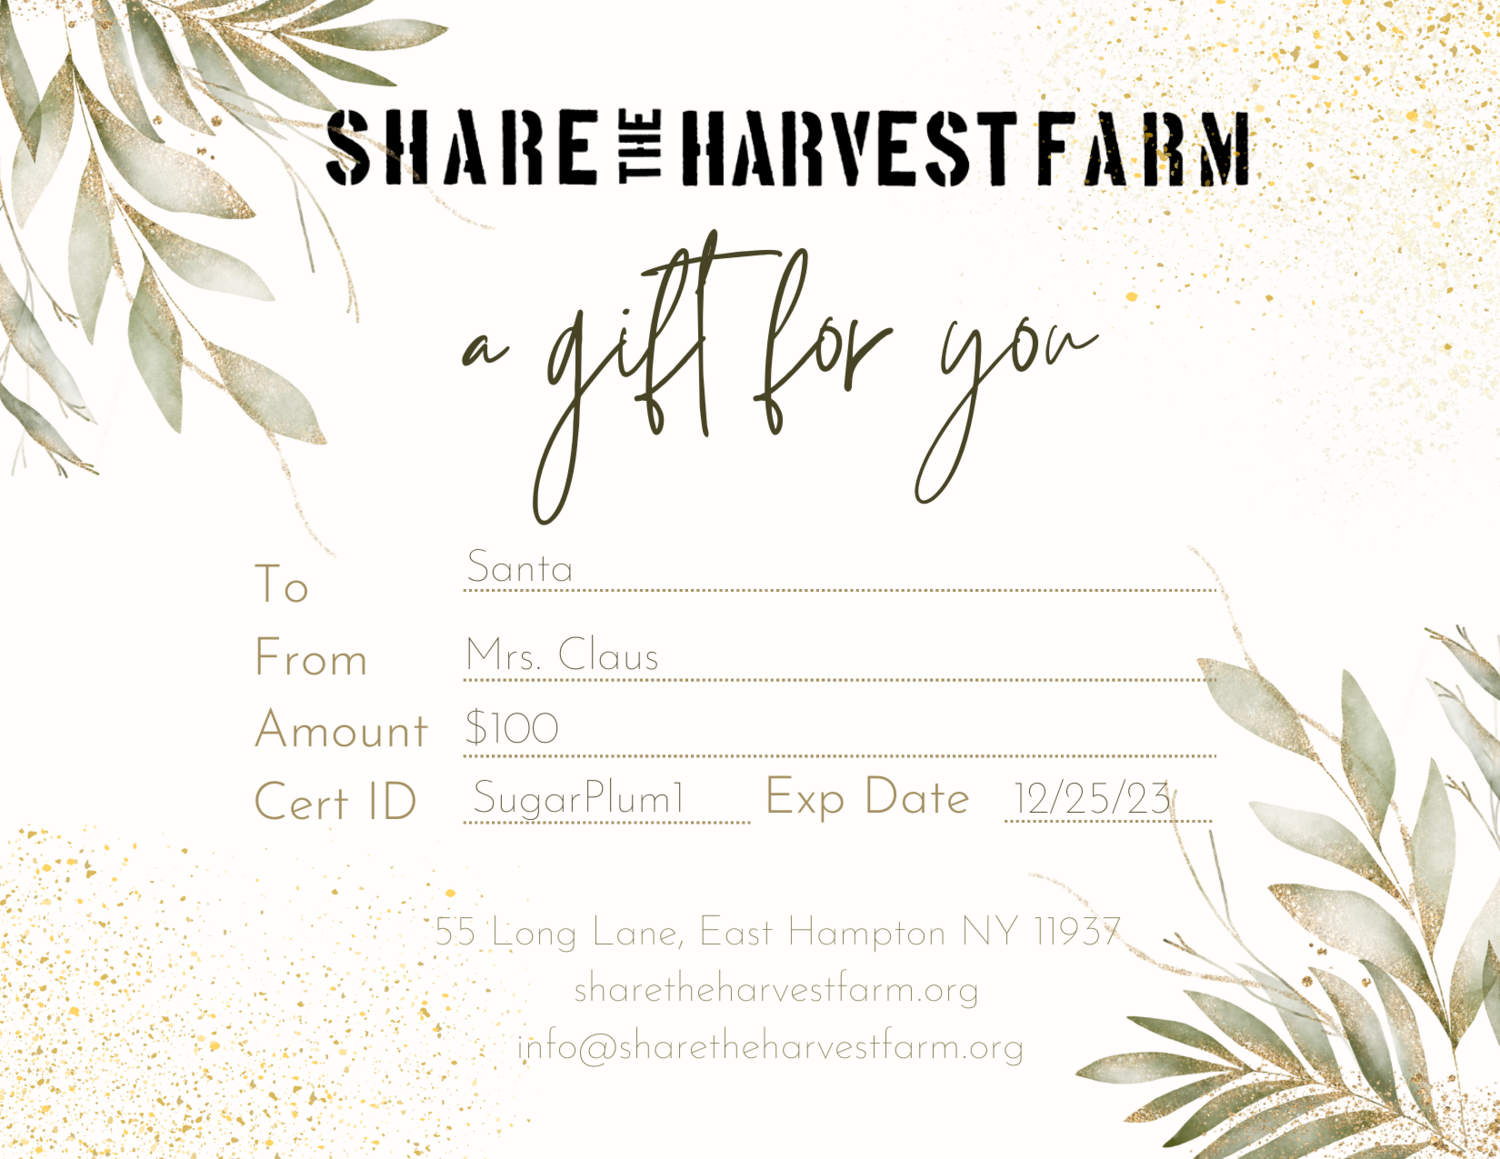 Share the Harvest Gift Certificate $100.00